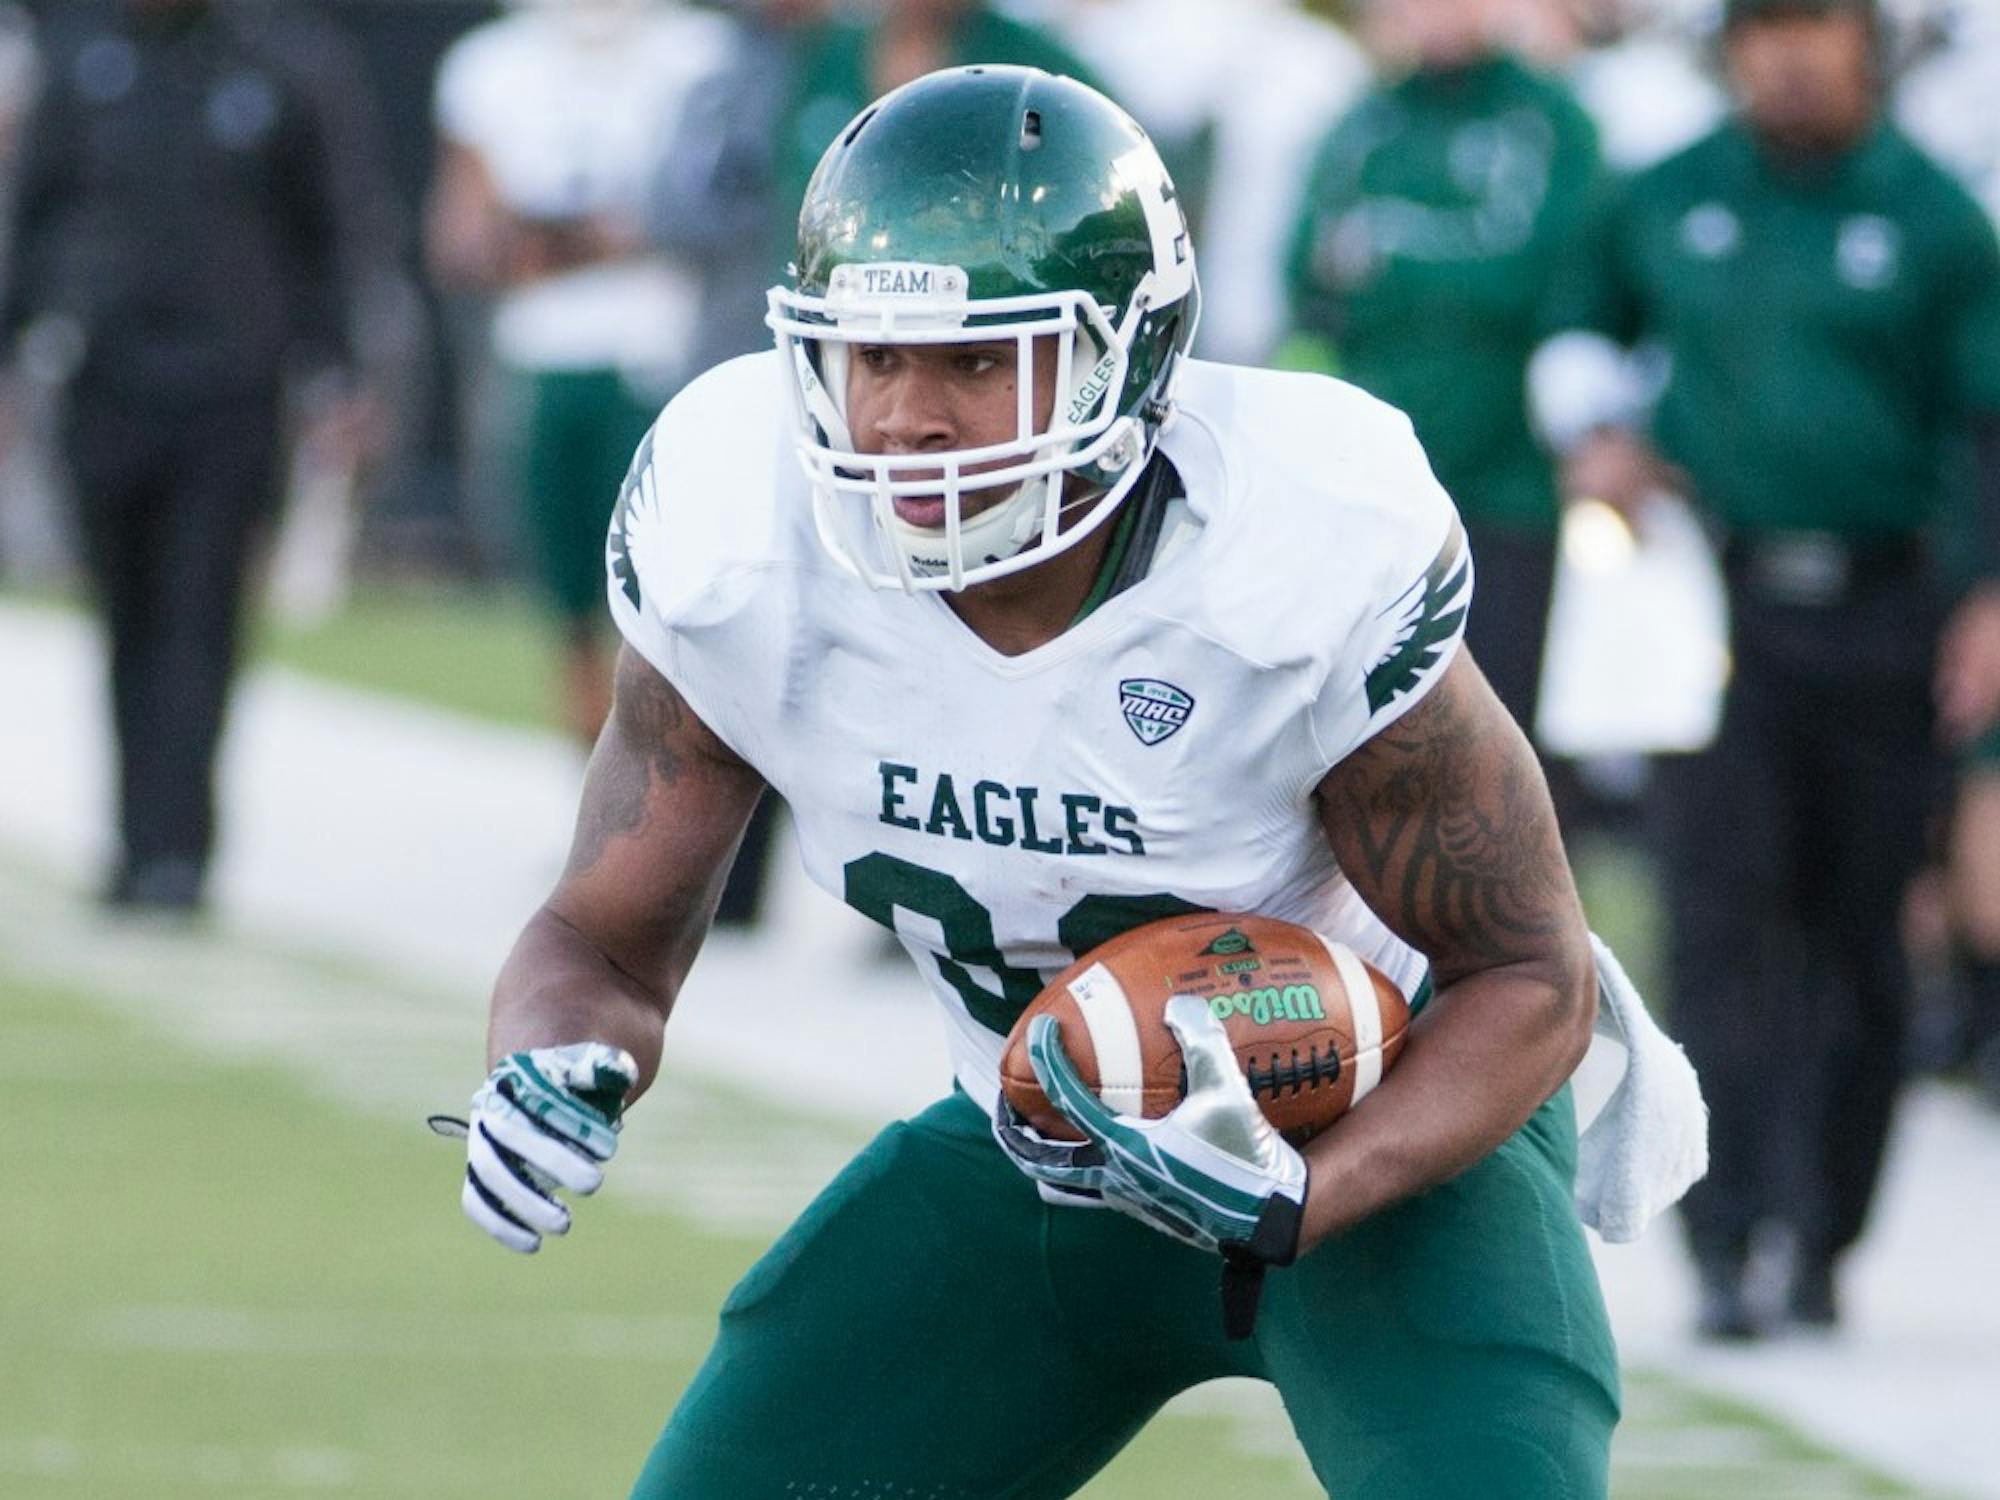 EMU tight end Tyreese Russell had 4 catches for 90 yards including a touchdown in Easterns 59-20 loss to Northern Illinois Saturday in DeKalb. The 90 recieving yards were a career best for Russell.